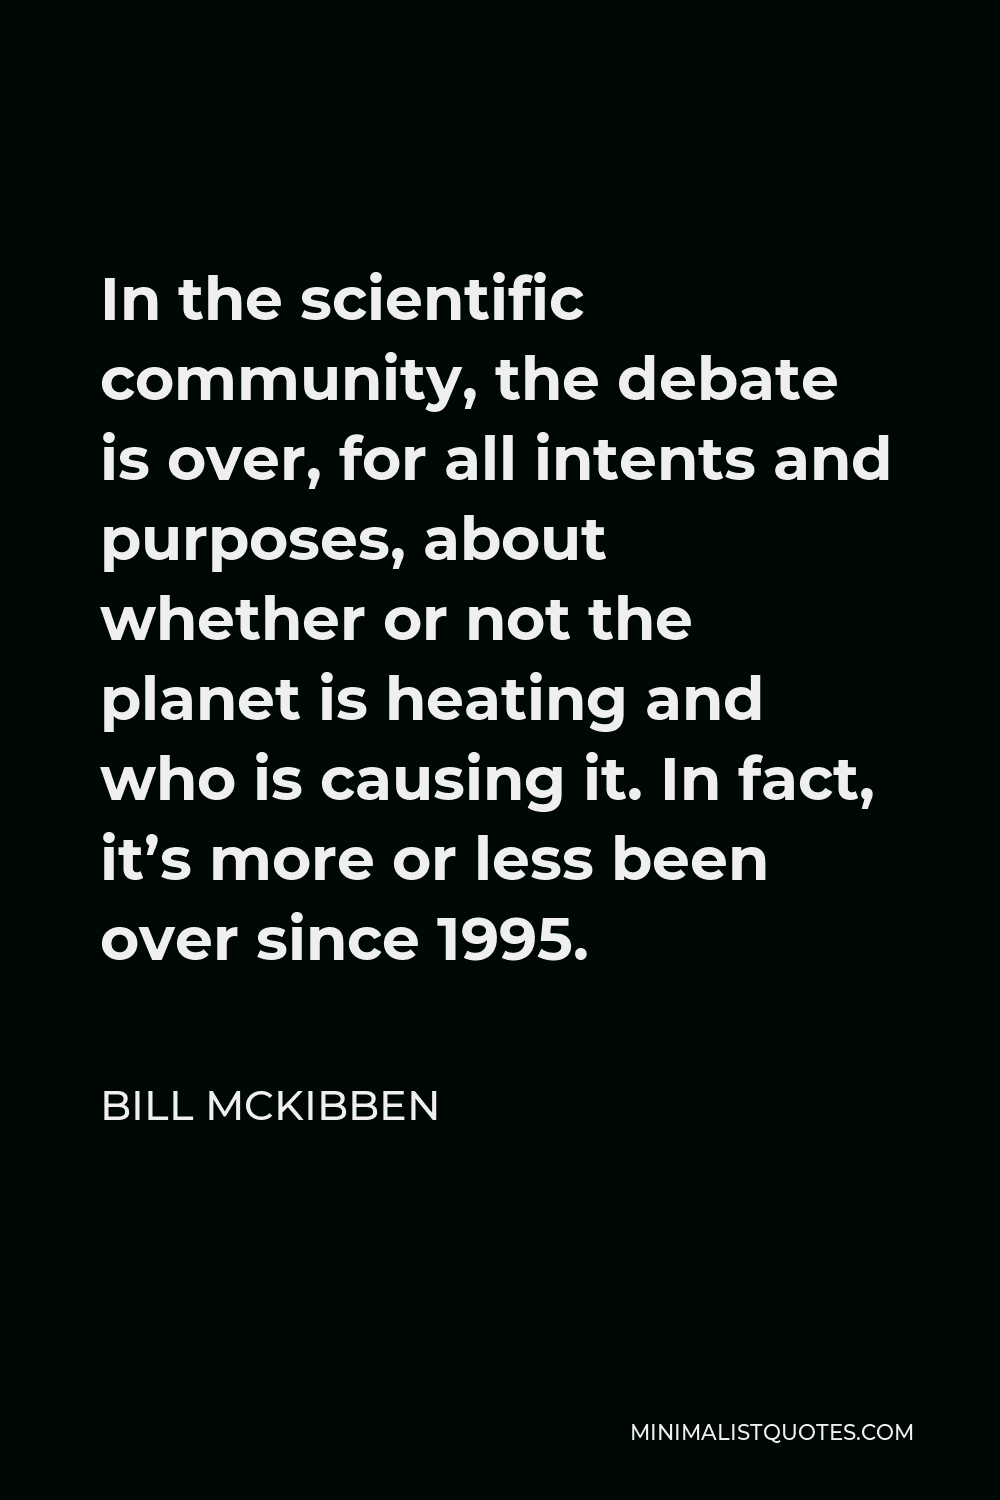 Bill McKibben Quote - In the scientific community, the debate is over, for all intents and purposes, about whether or not the planet is heating and who is causing it. In fact, it’s more or less been over since 1995.